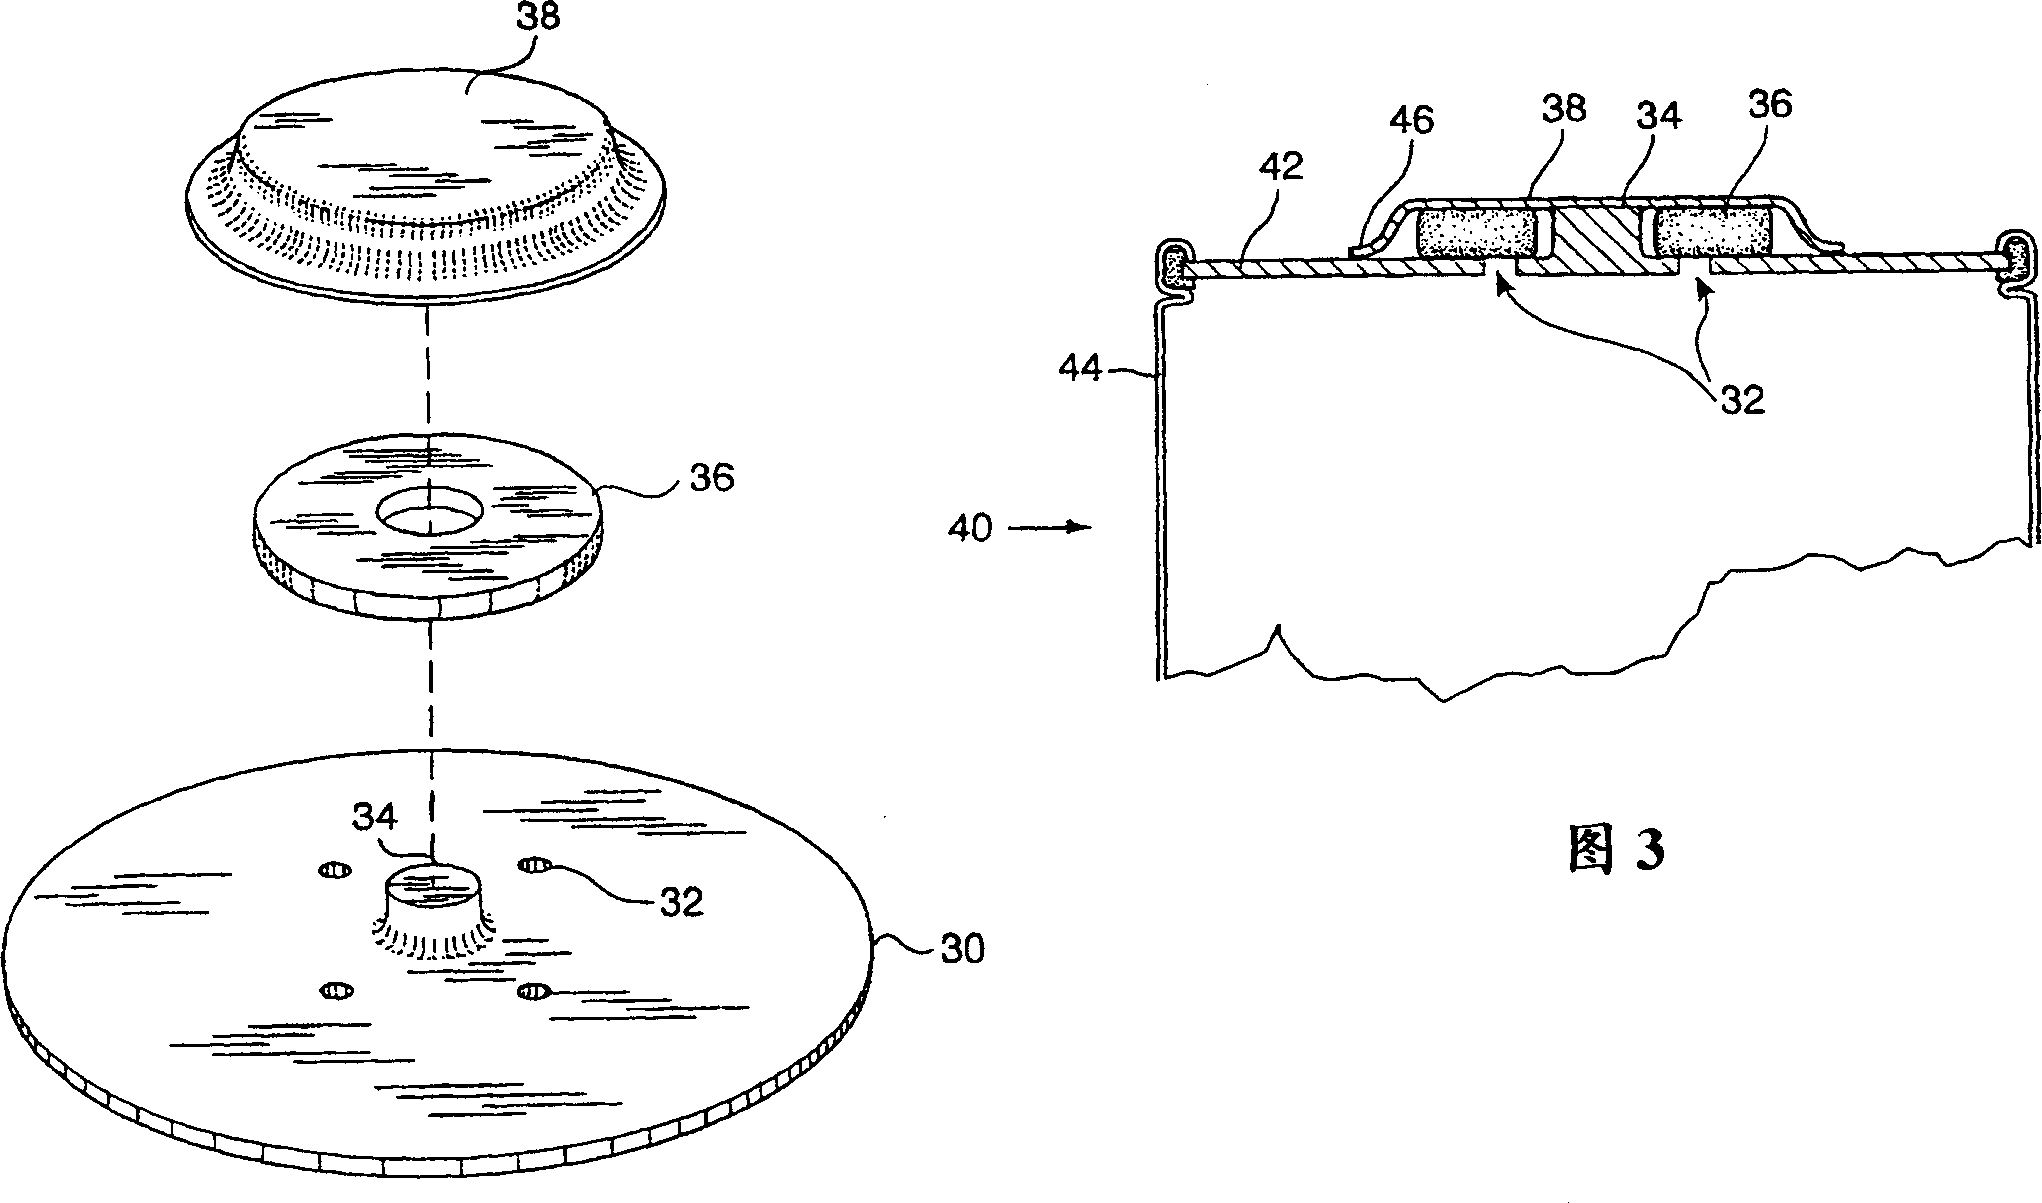 Electrochemical cell safety vent